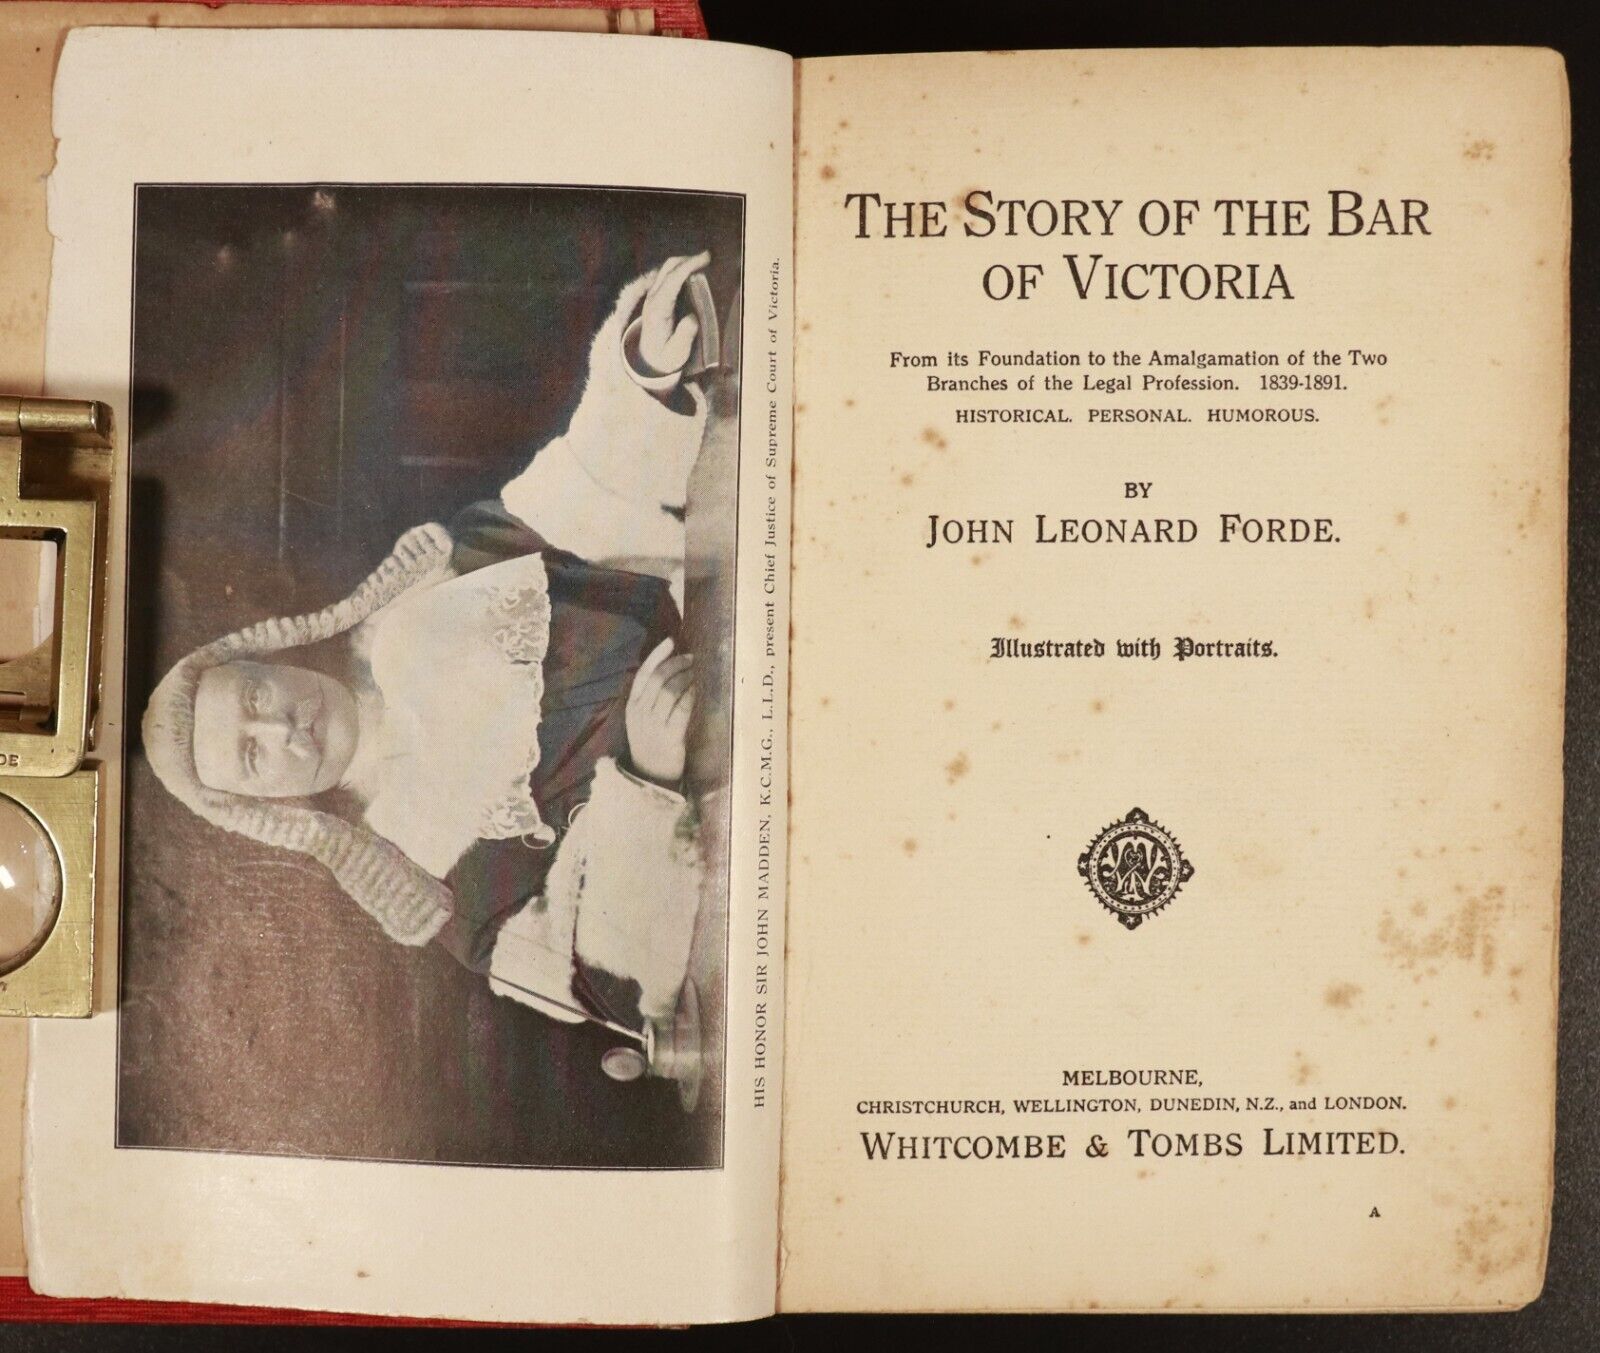 1910 Story Of The Bar Of Victoria Antique Australian Legal History Book JL Forde - 0